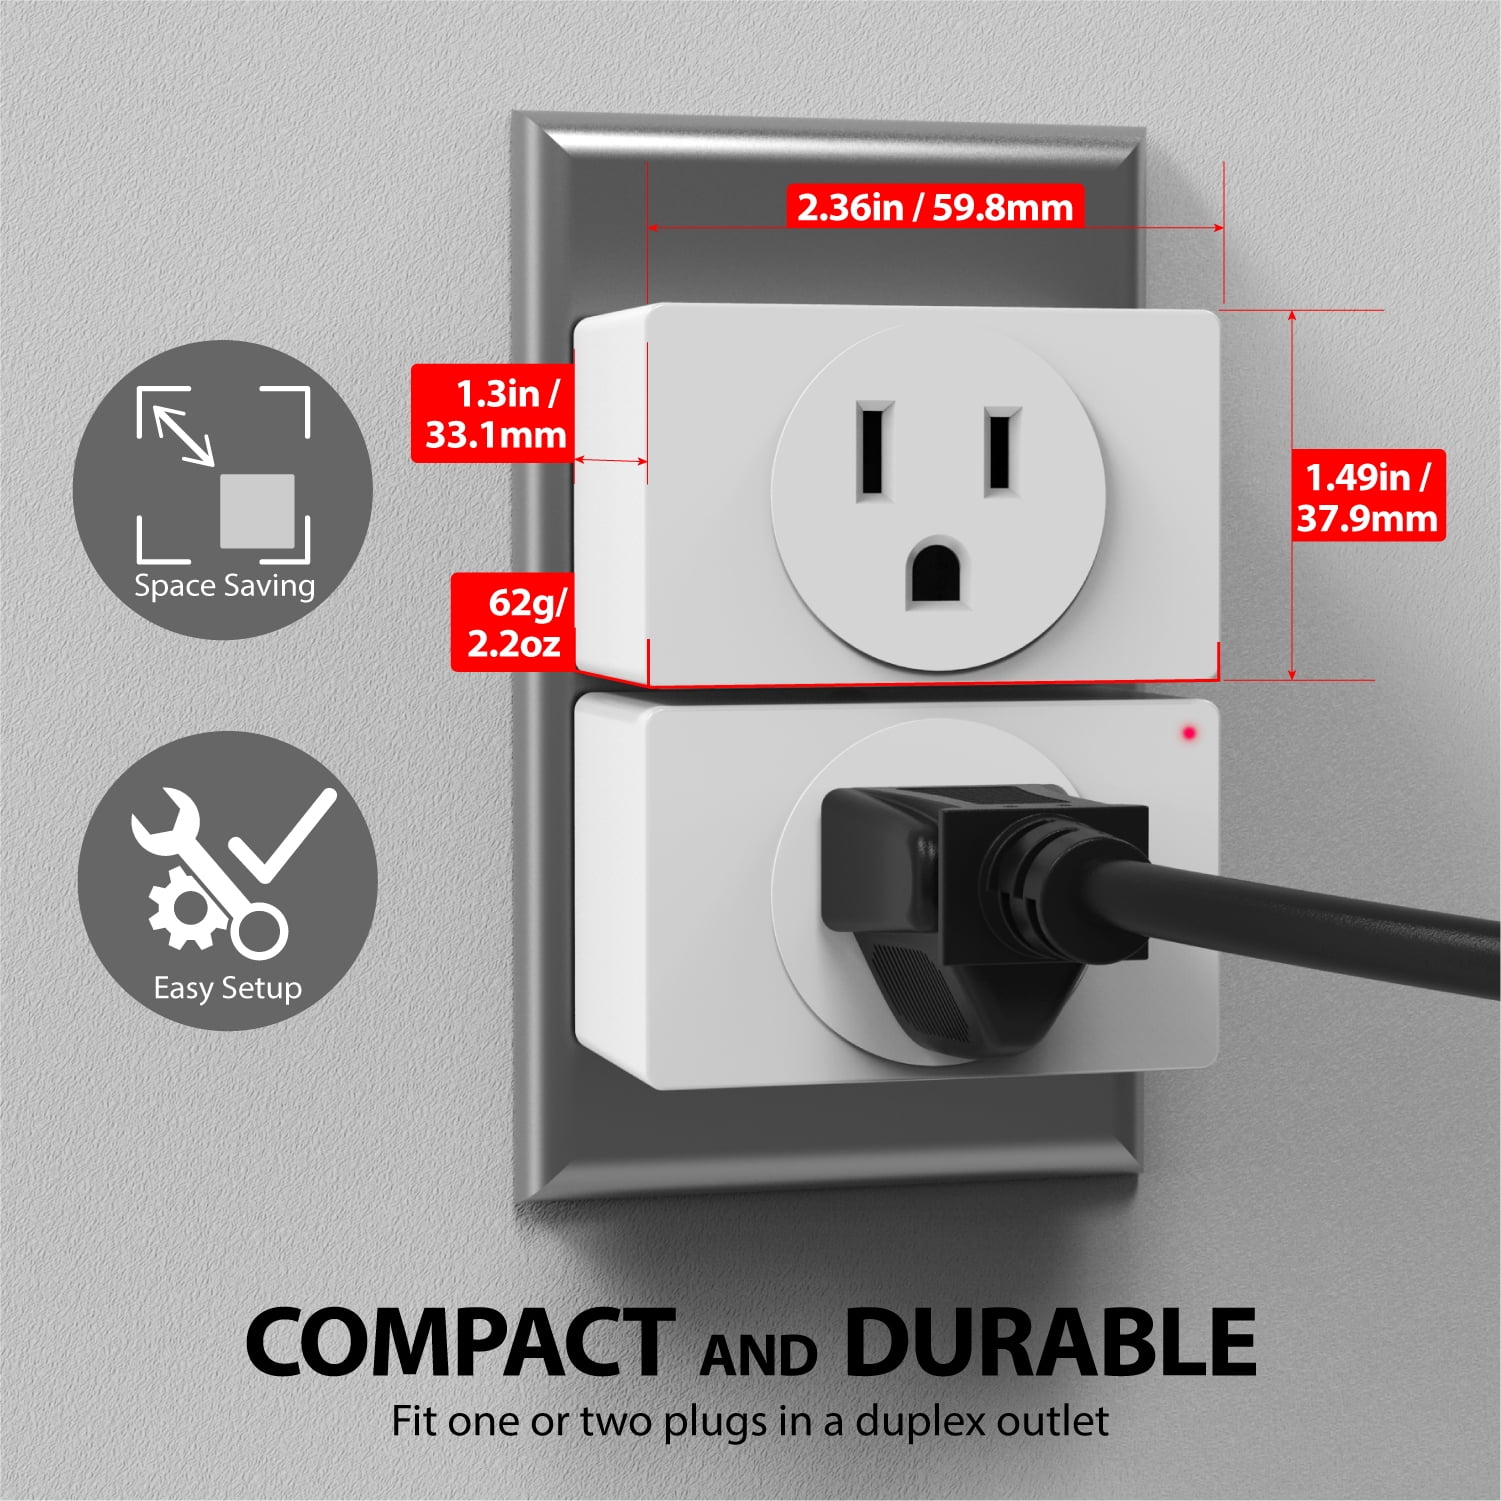 Fosmon Wireless Remote Control Outdoor Electrical Outlet Switch  Weatherproof Heavy Duty 3-Prong Plug-in ETL Listed (Battery Included),  Black - 2 Packs 